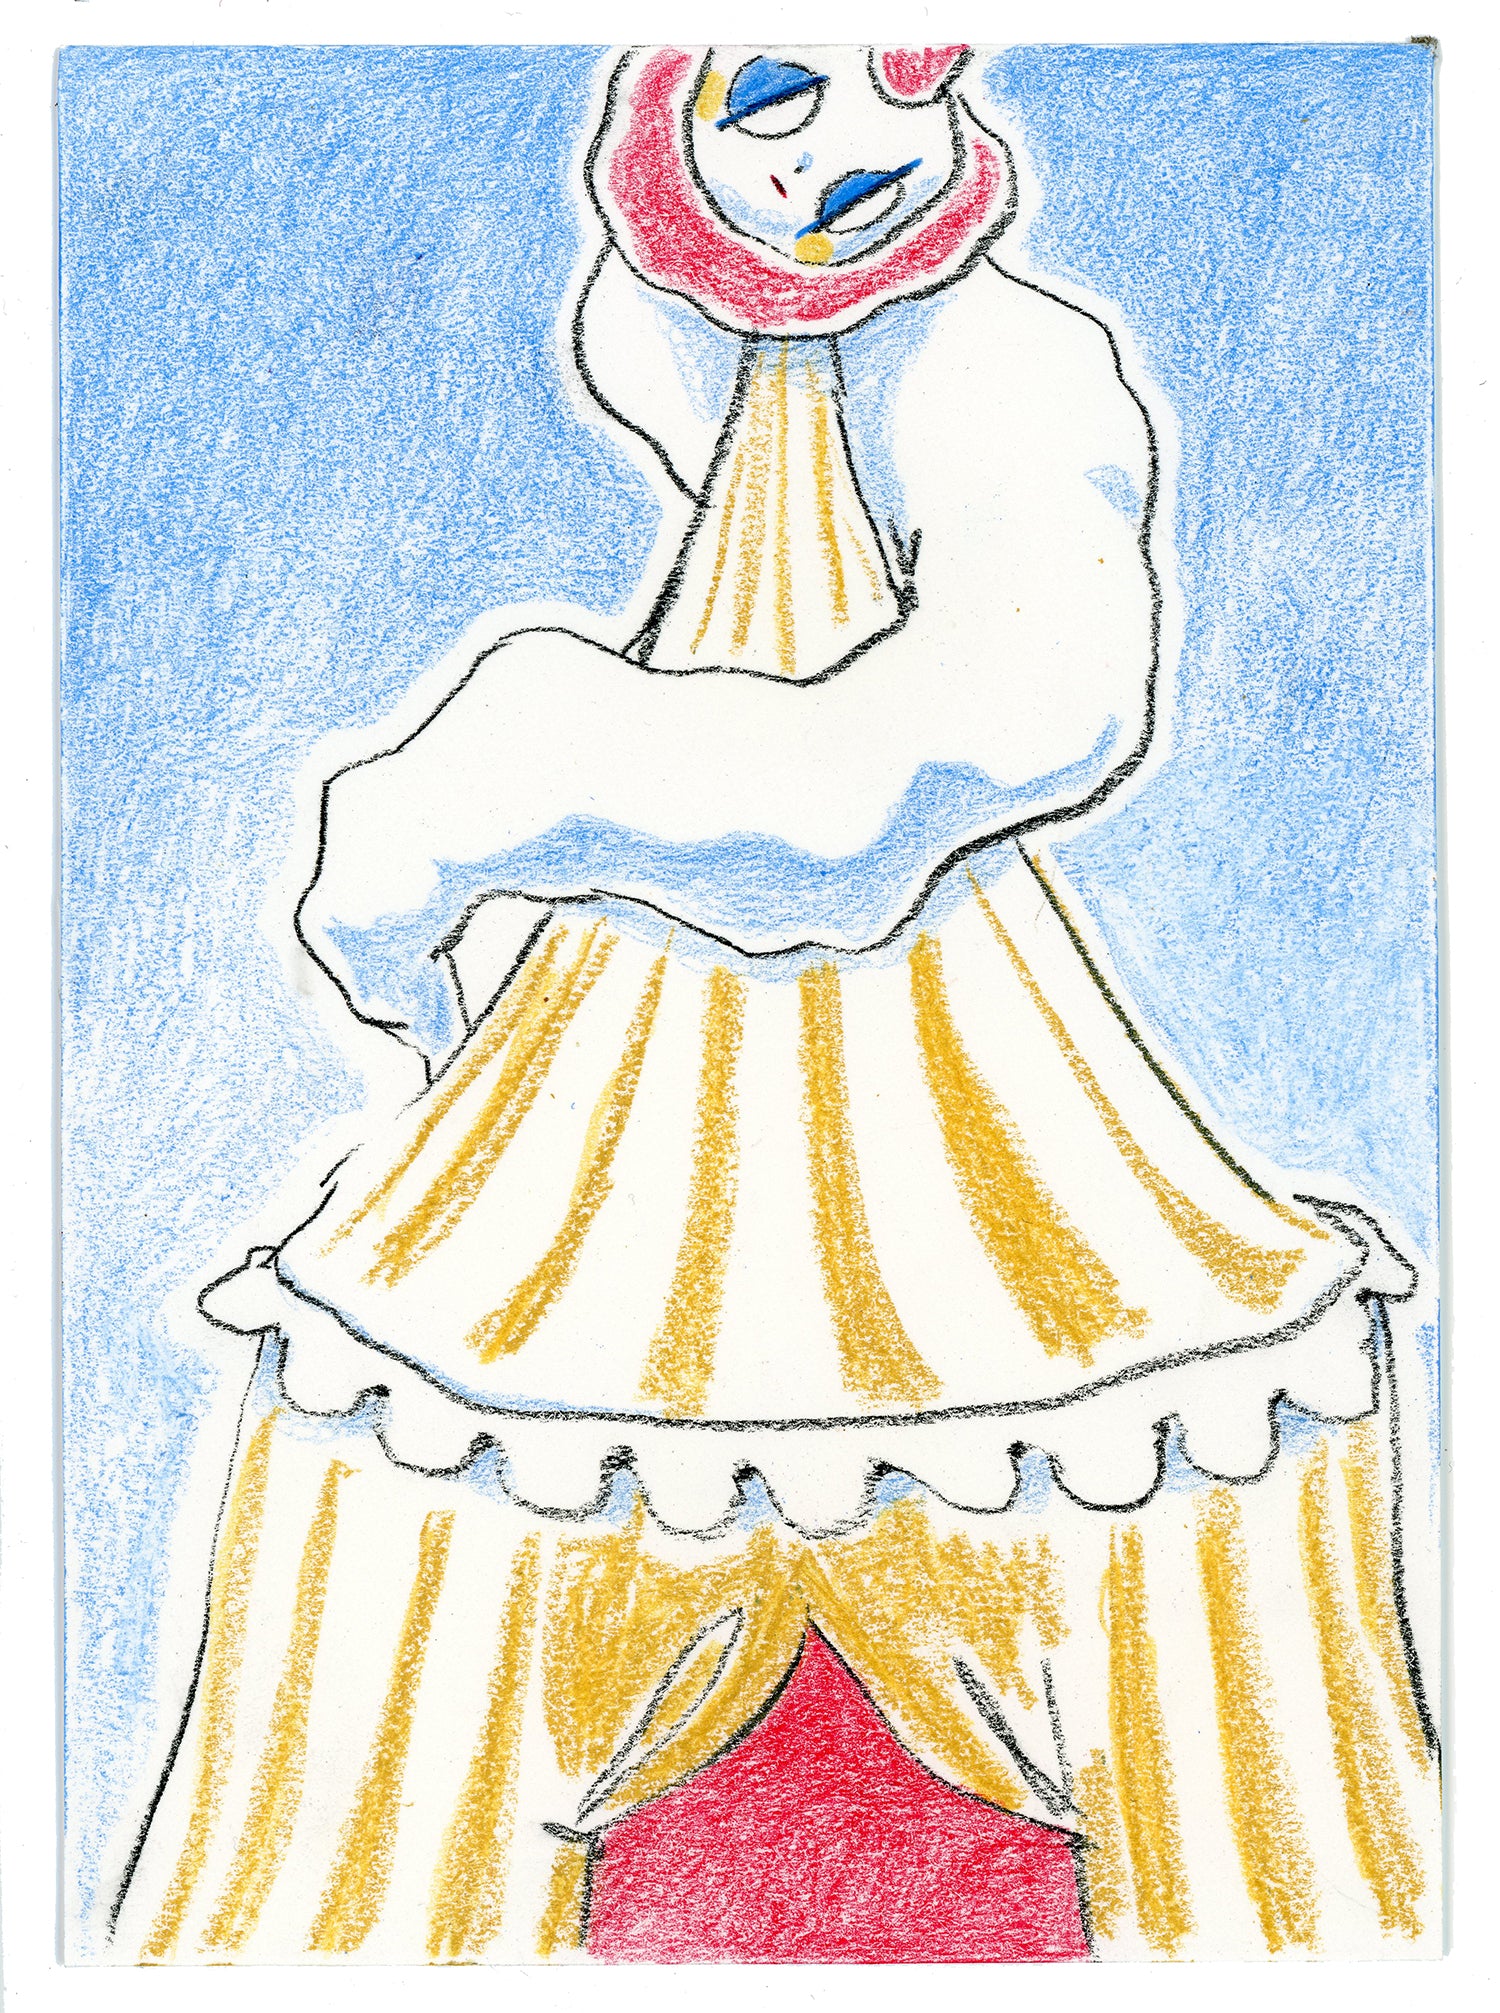 Drawing #7:  "Red Holsomclown, Yellow Tent"